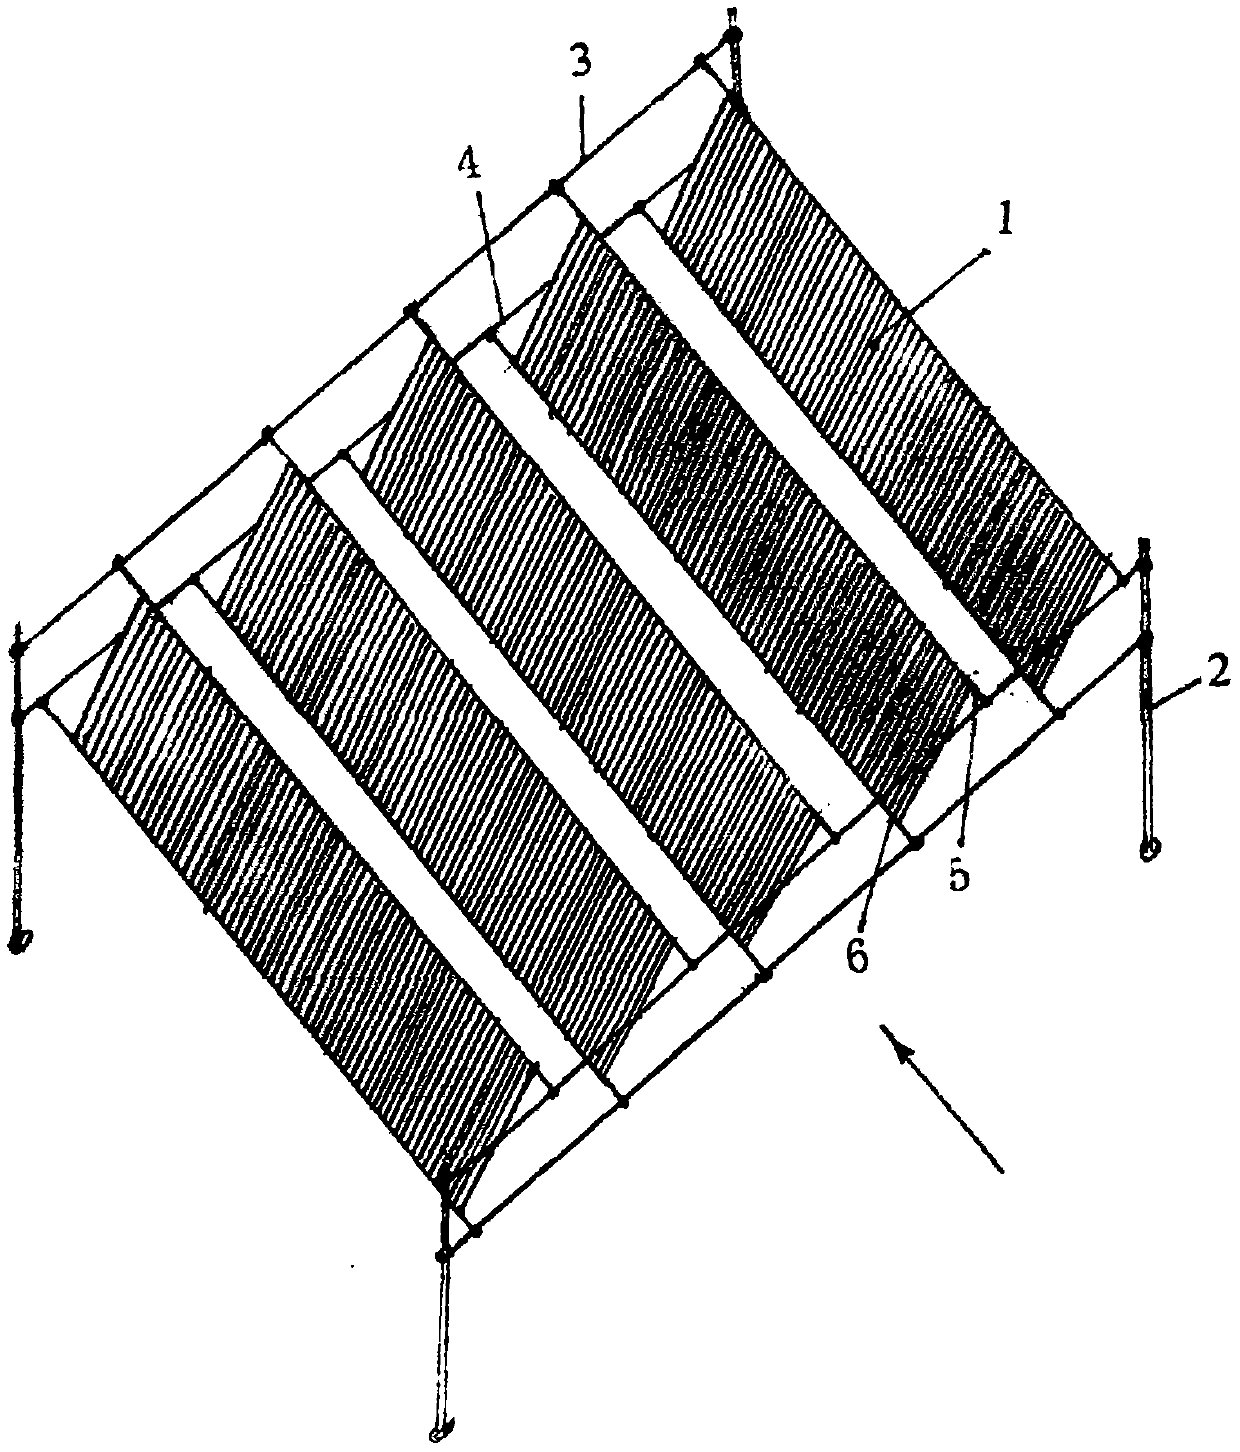 Flexible photovoltaic power generation field